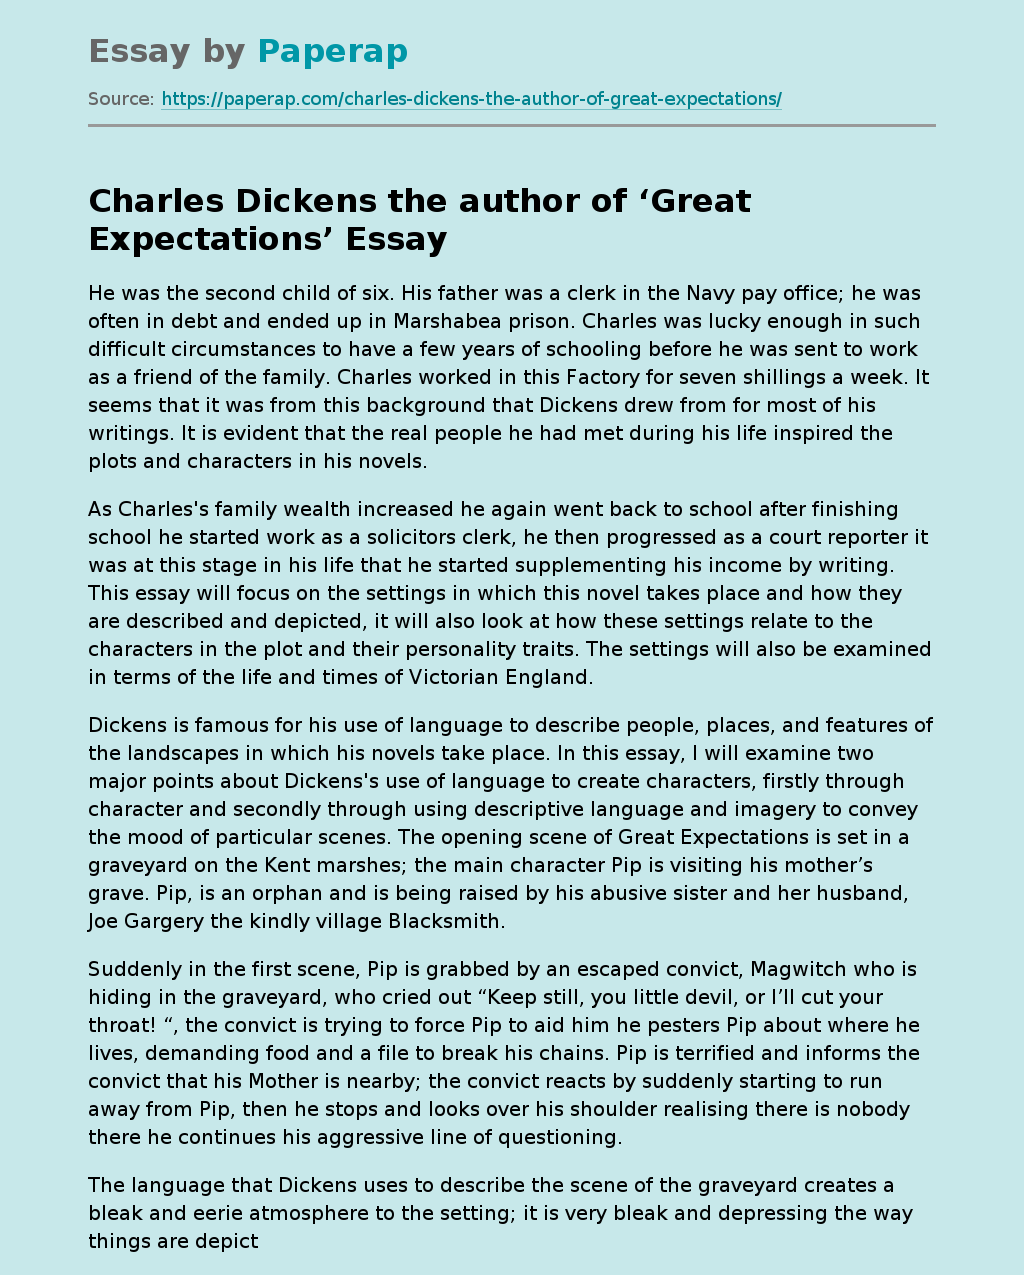 Charles Dickens the author of ‘Great Expectations’